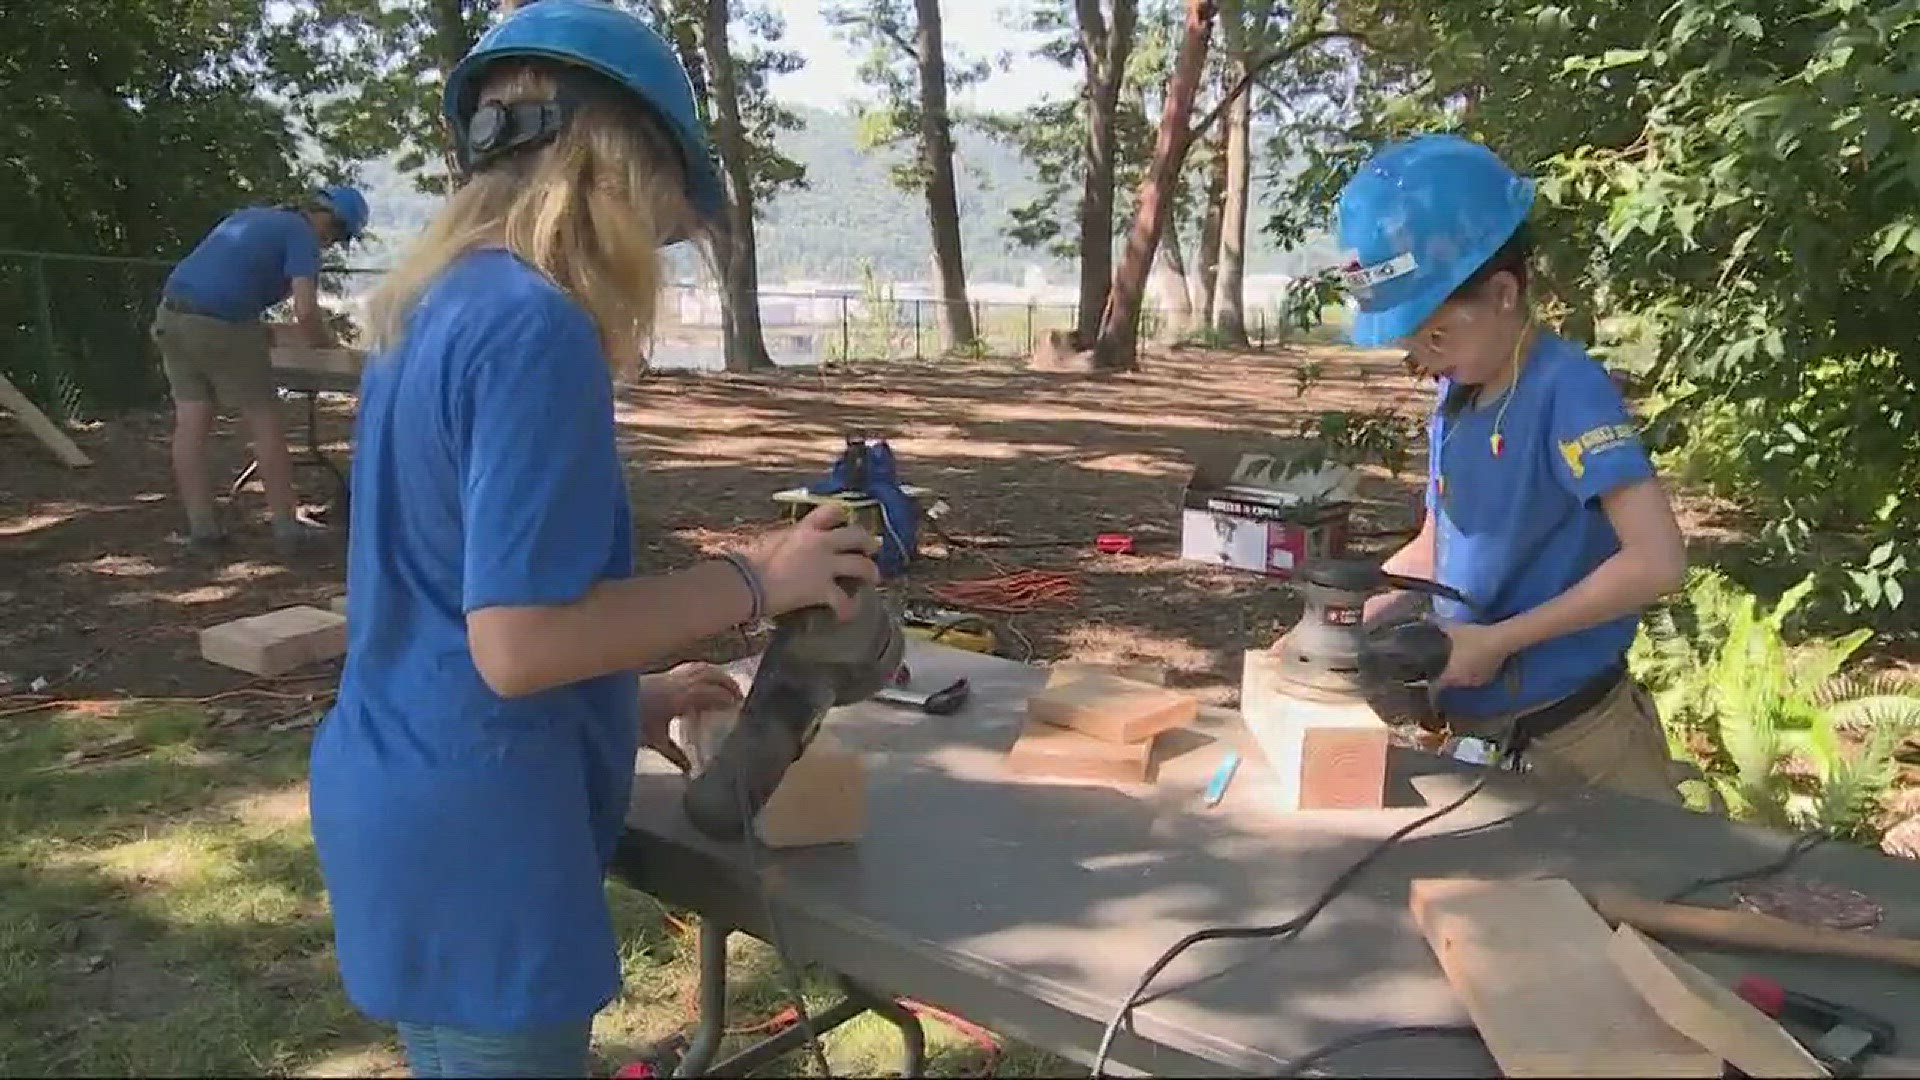 Little girls get creative with power tools